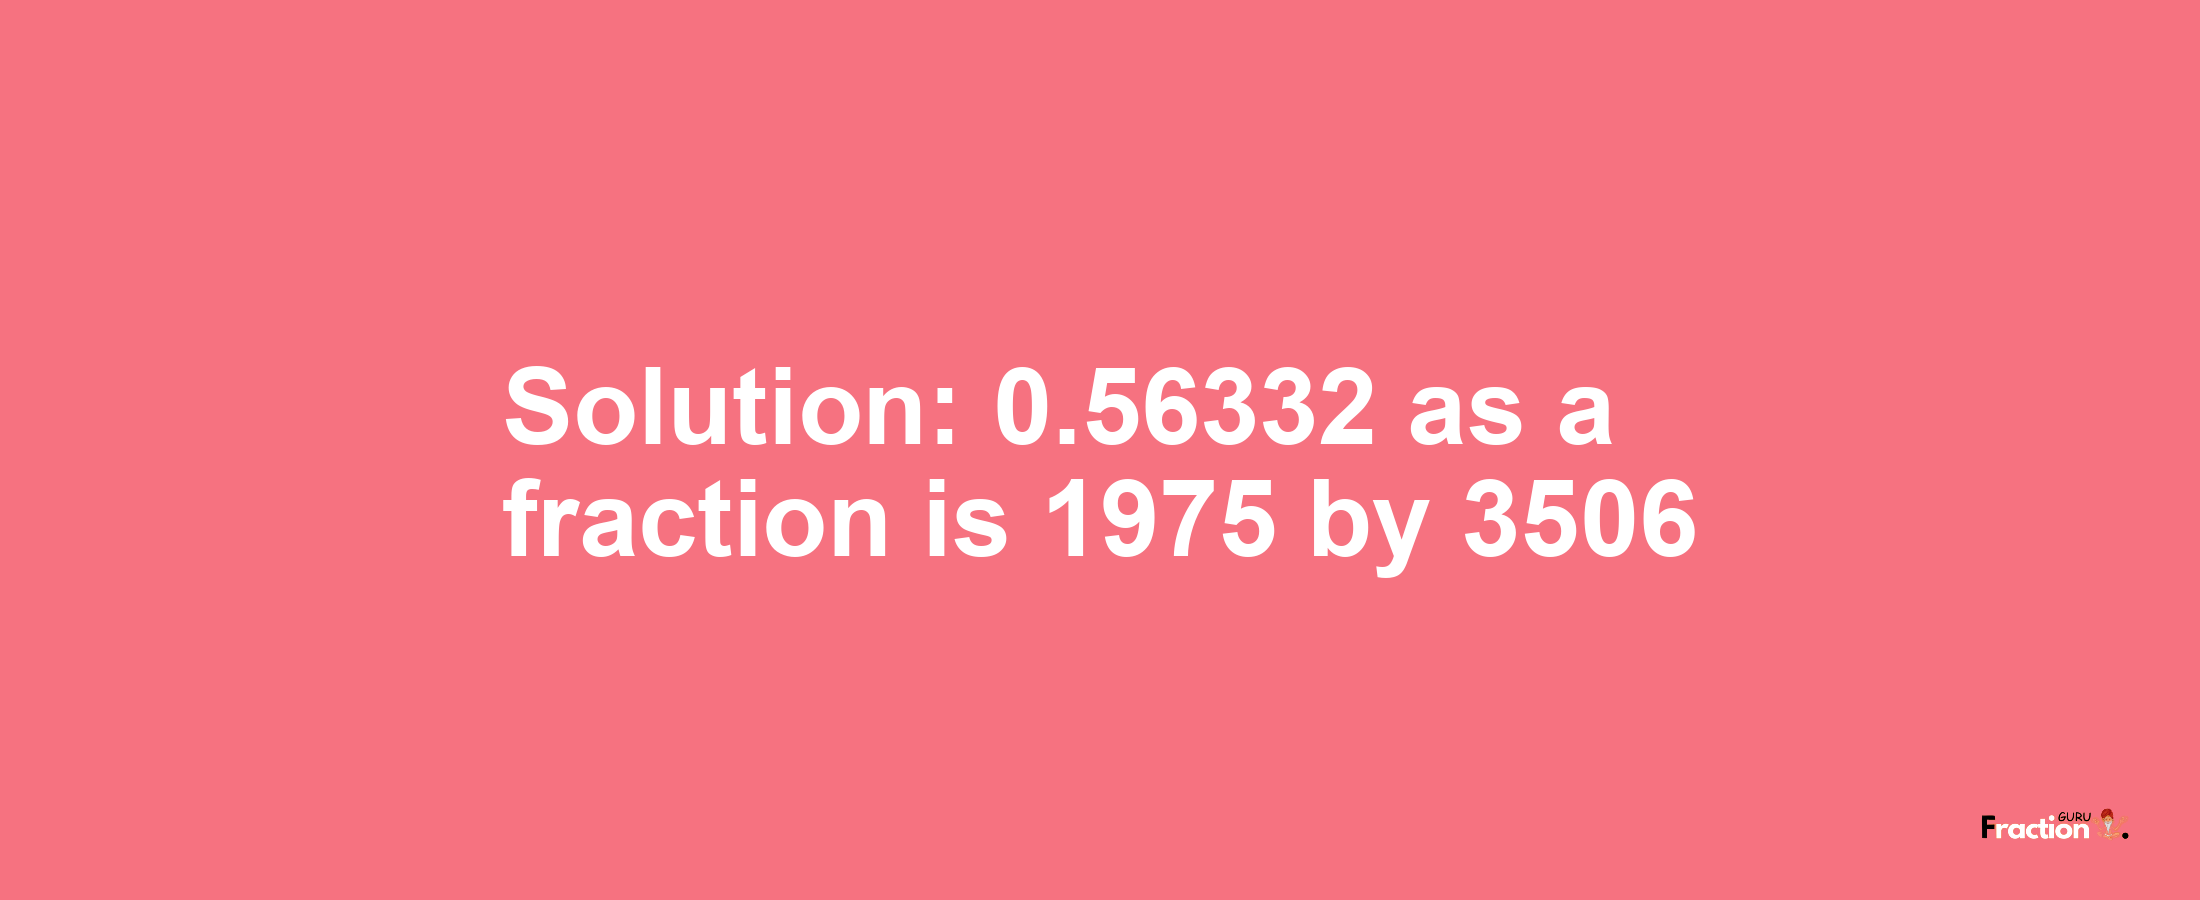 Solution:0.56332 as a fraction is 1975/3506